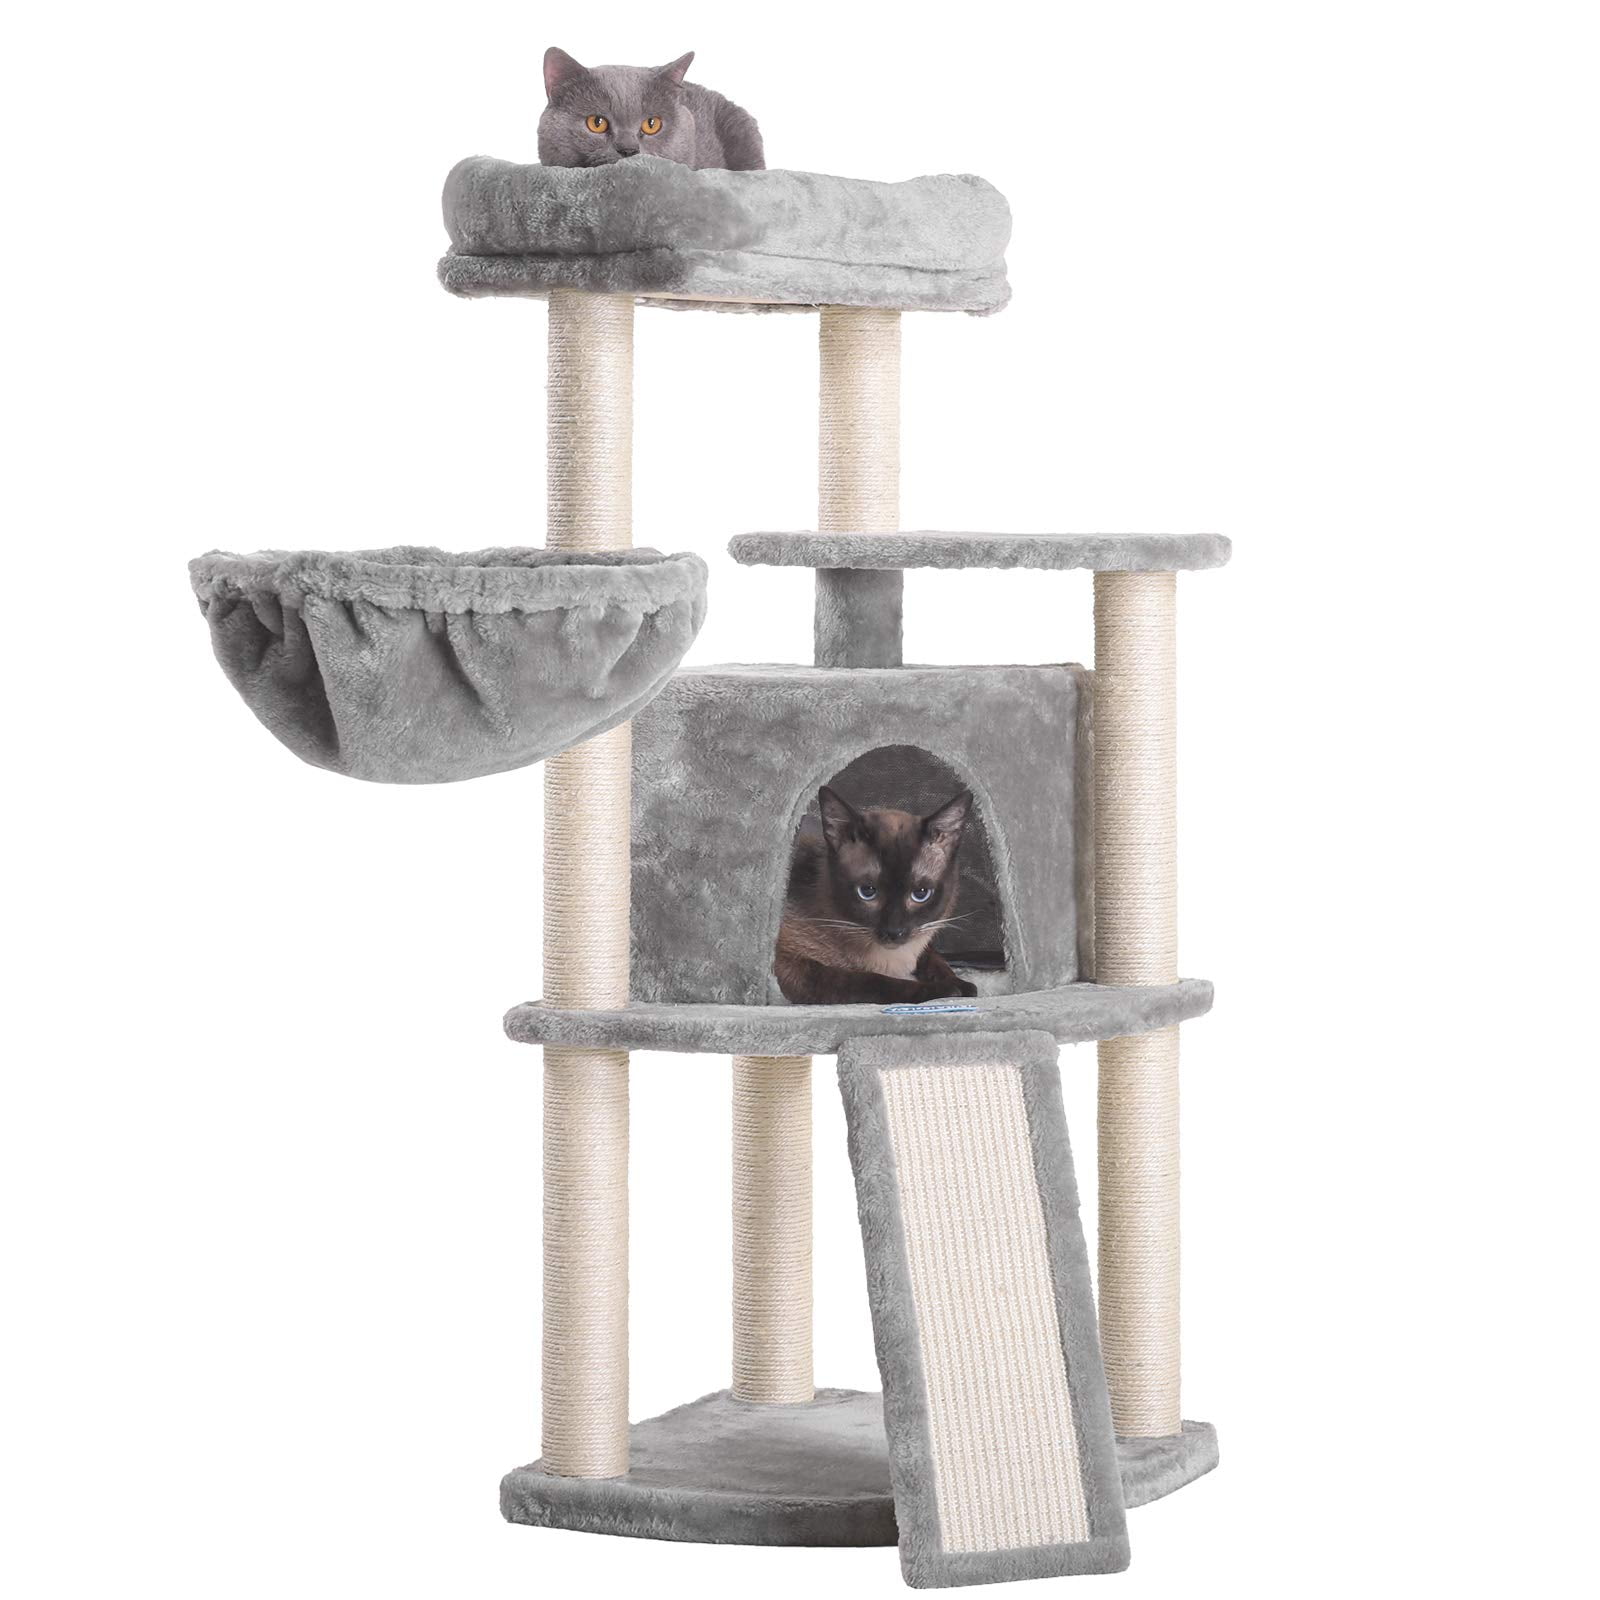 Cats and Pets Hey-bro Multi-Level Cat Tree Condo Furniture with Sisal-Covered Scratching Posts for Kittens 